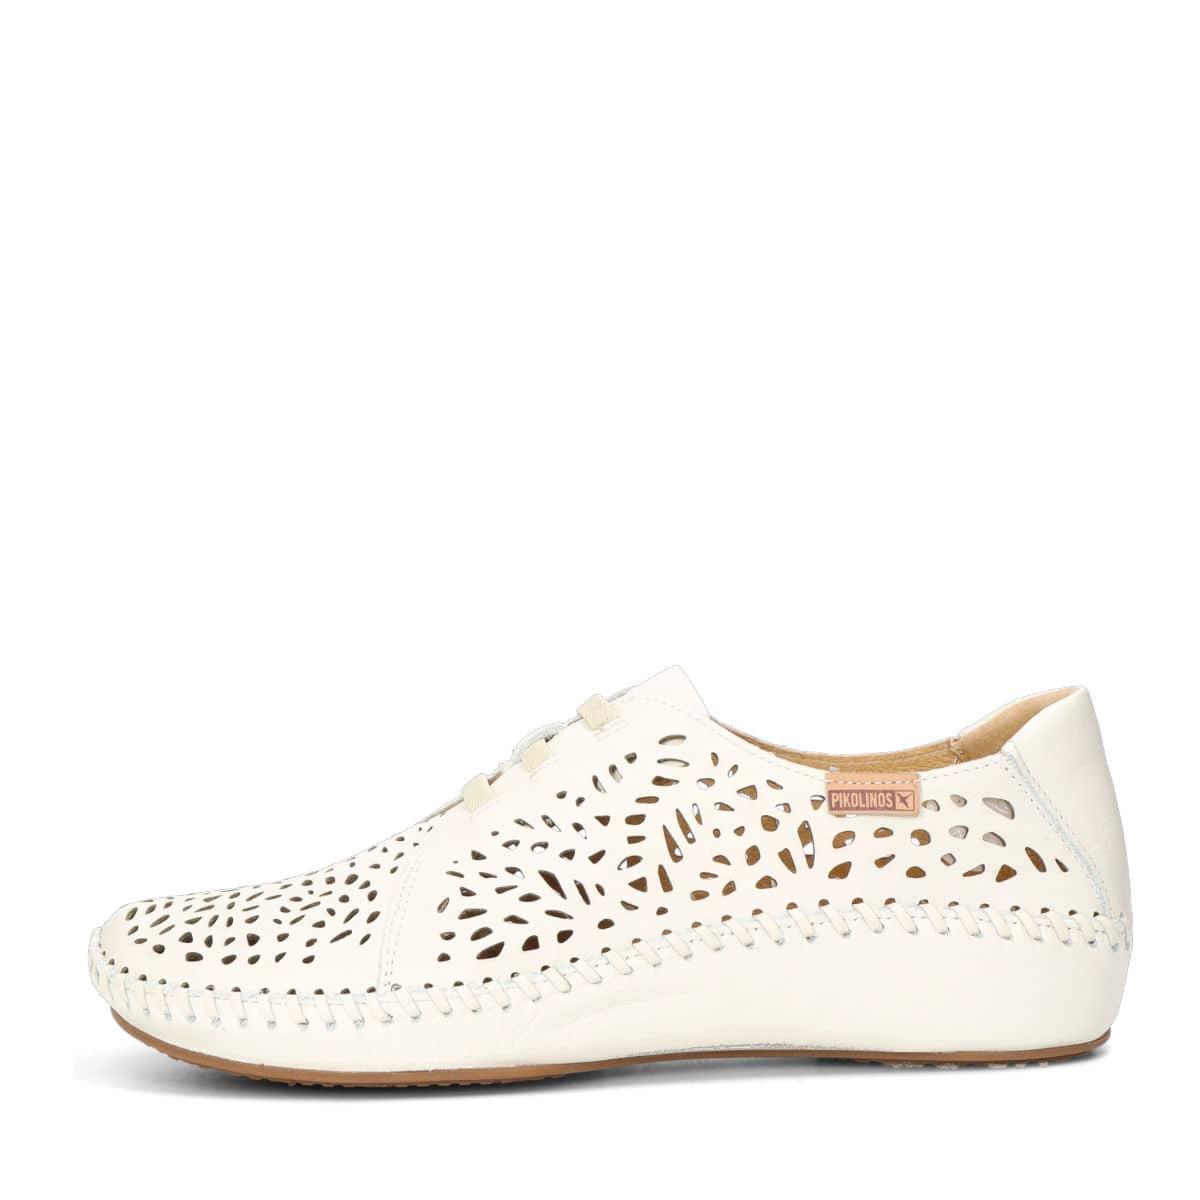 leather low shoes - beige/white | Robel.shoes